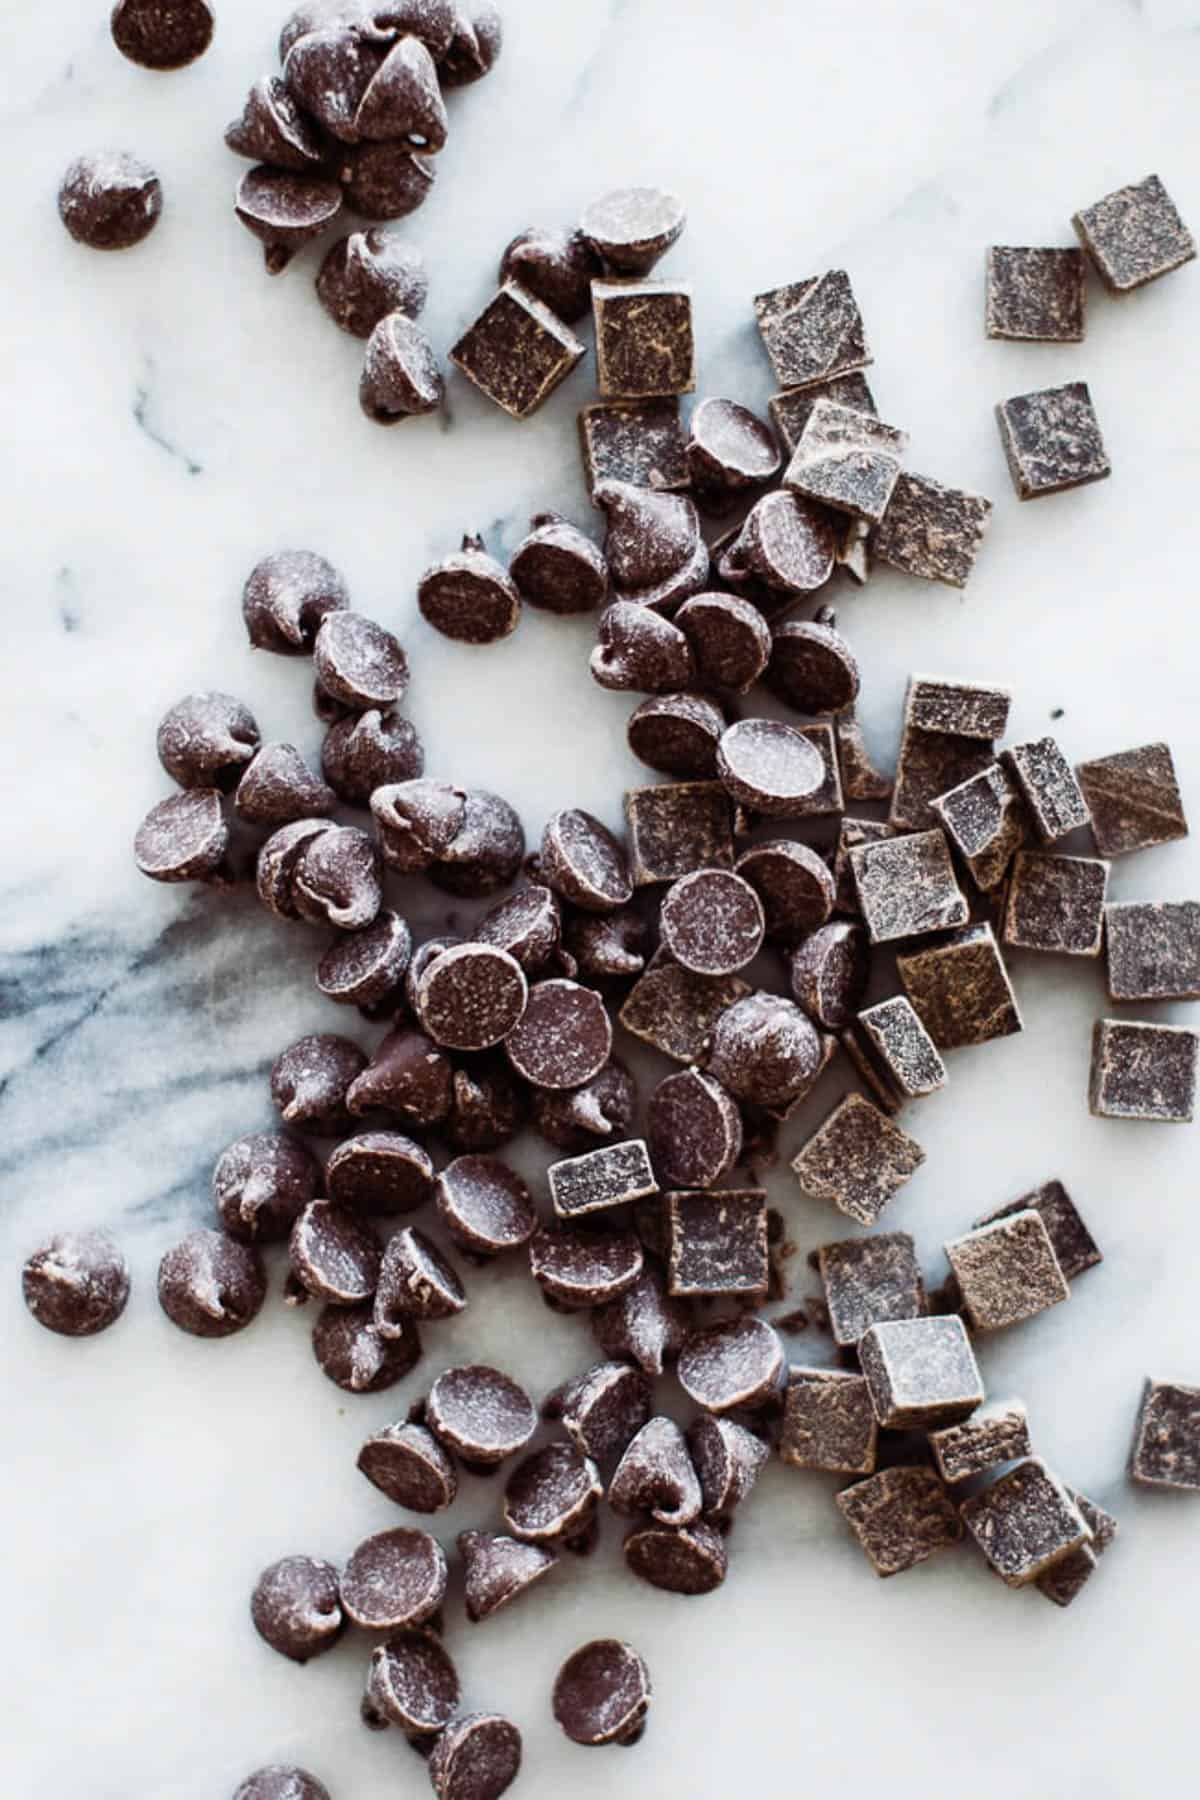 variety of chocolate chips on marble board.